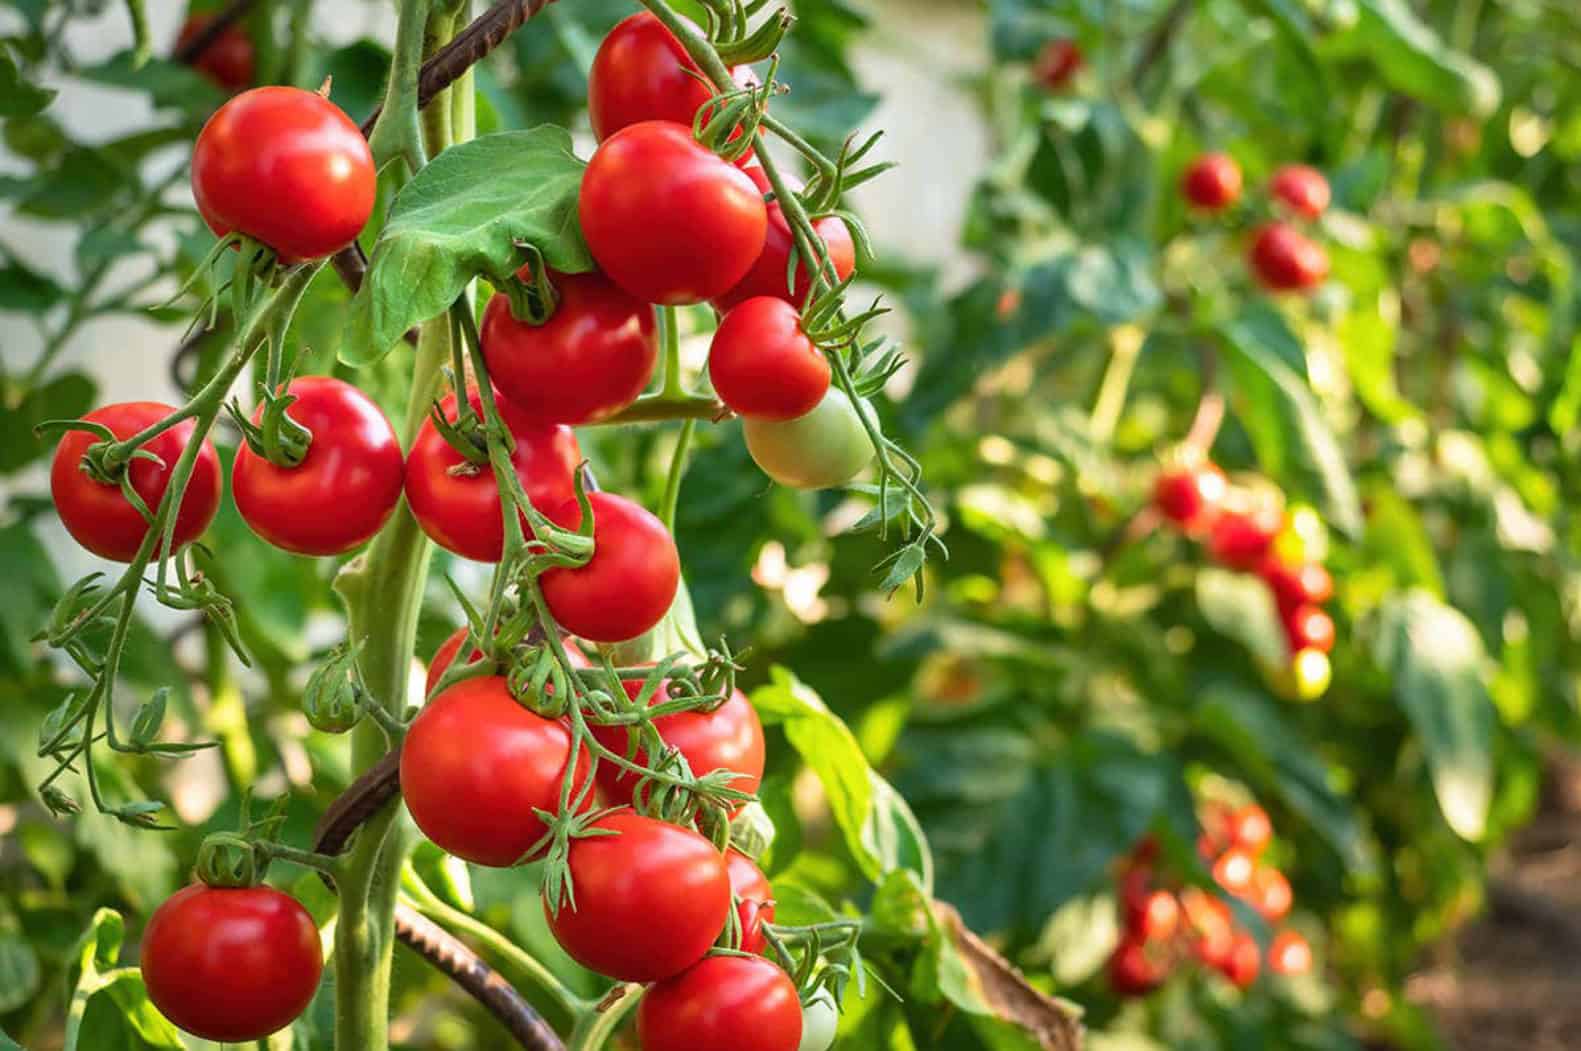 Nutritional Benefits Of Tomatoes